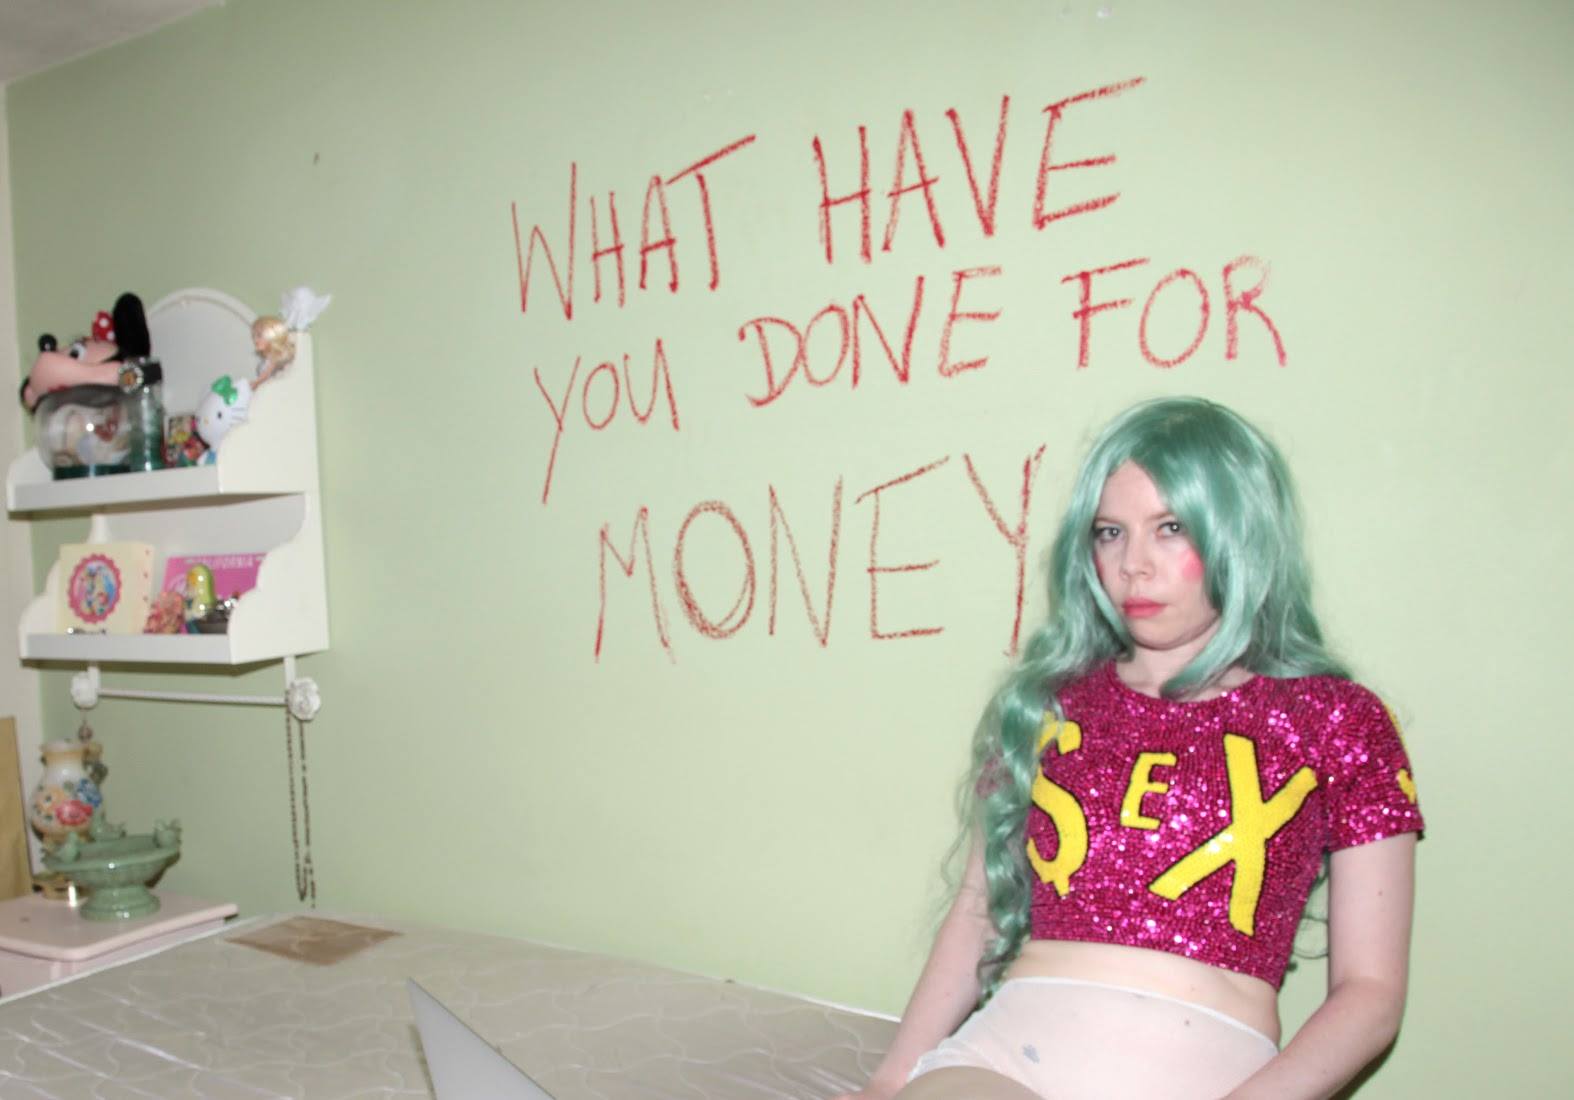 'What have you done for money' written in red on a wall